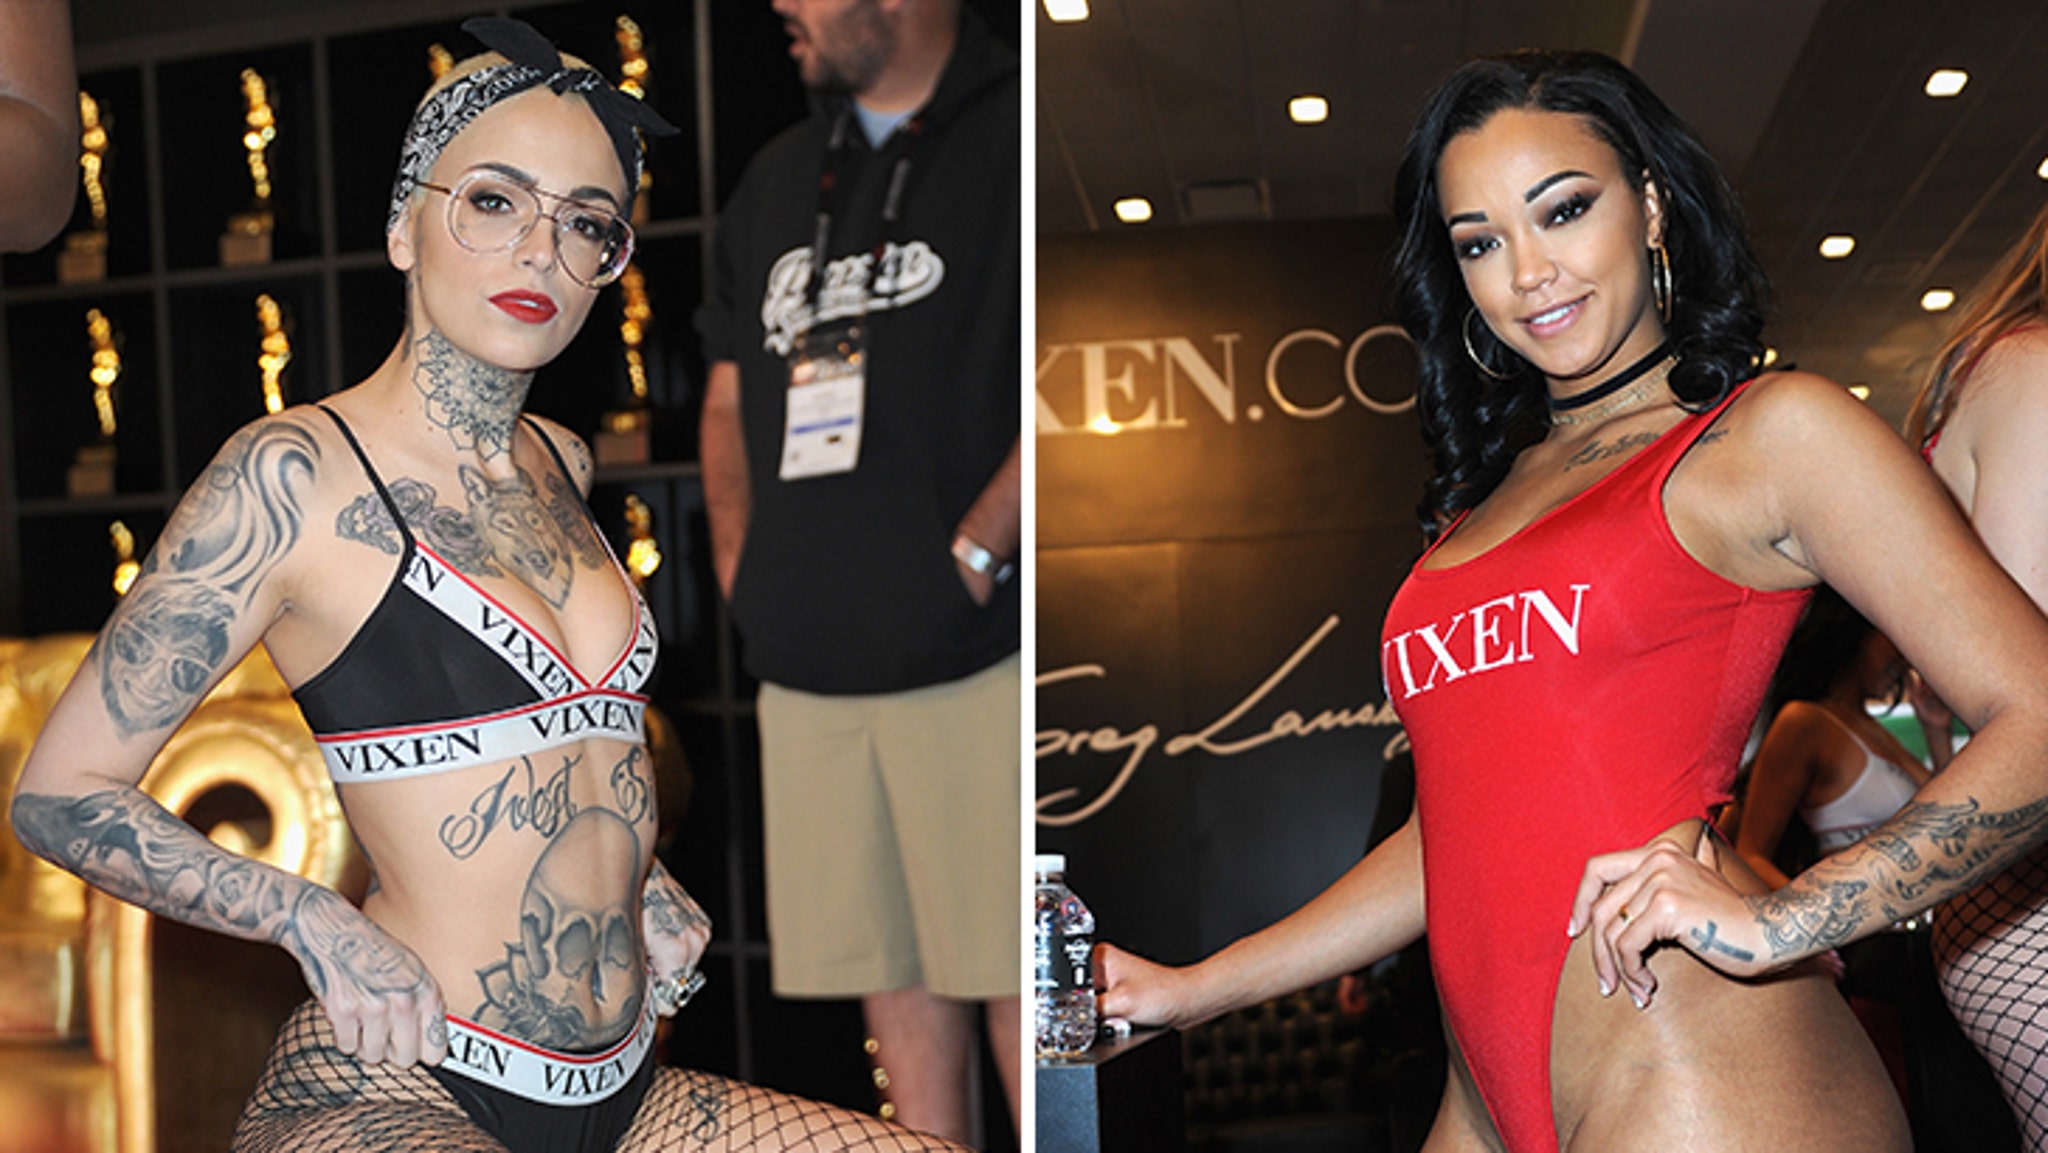 Porn Stars on Display at the 2018 AVN Adult Entertainment Expo in Vegas.